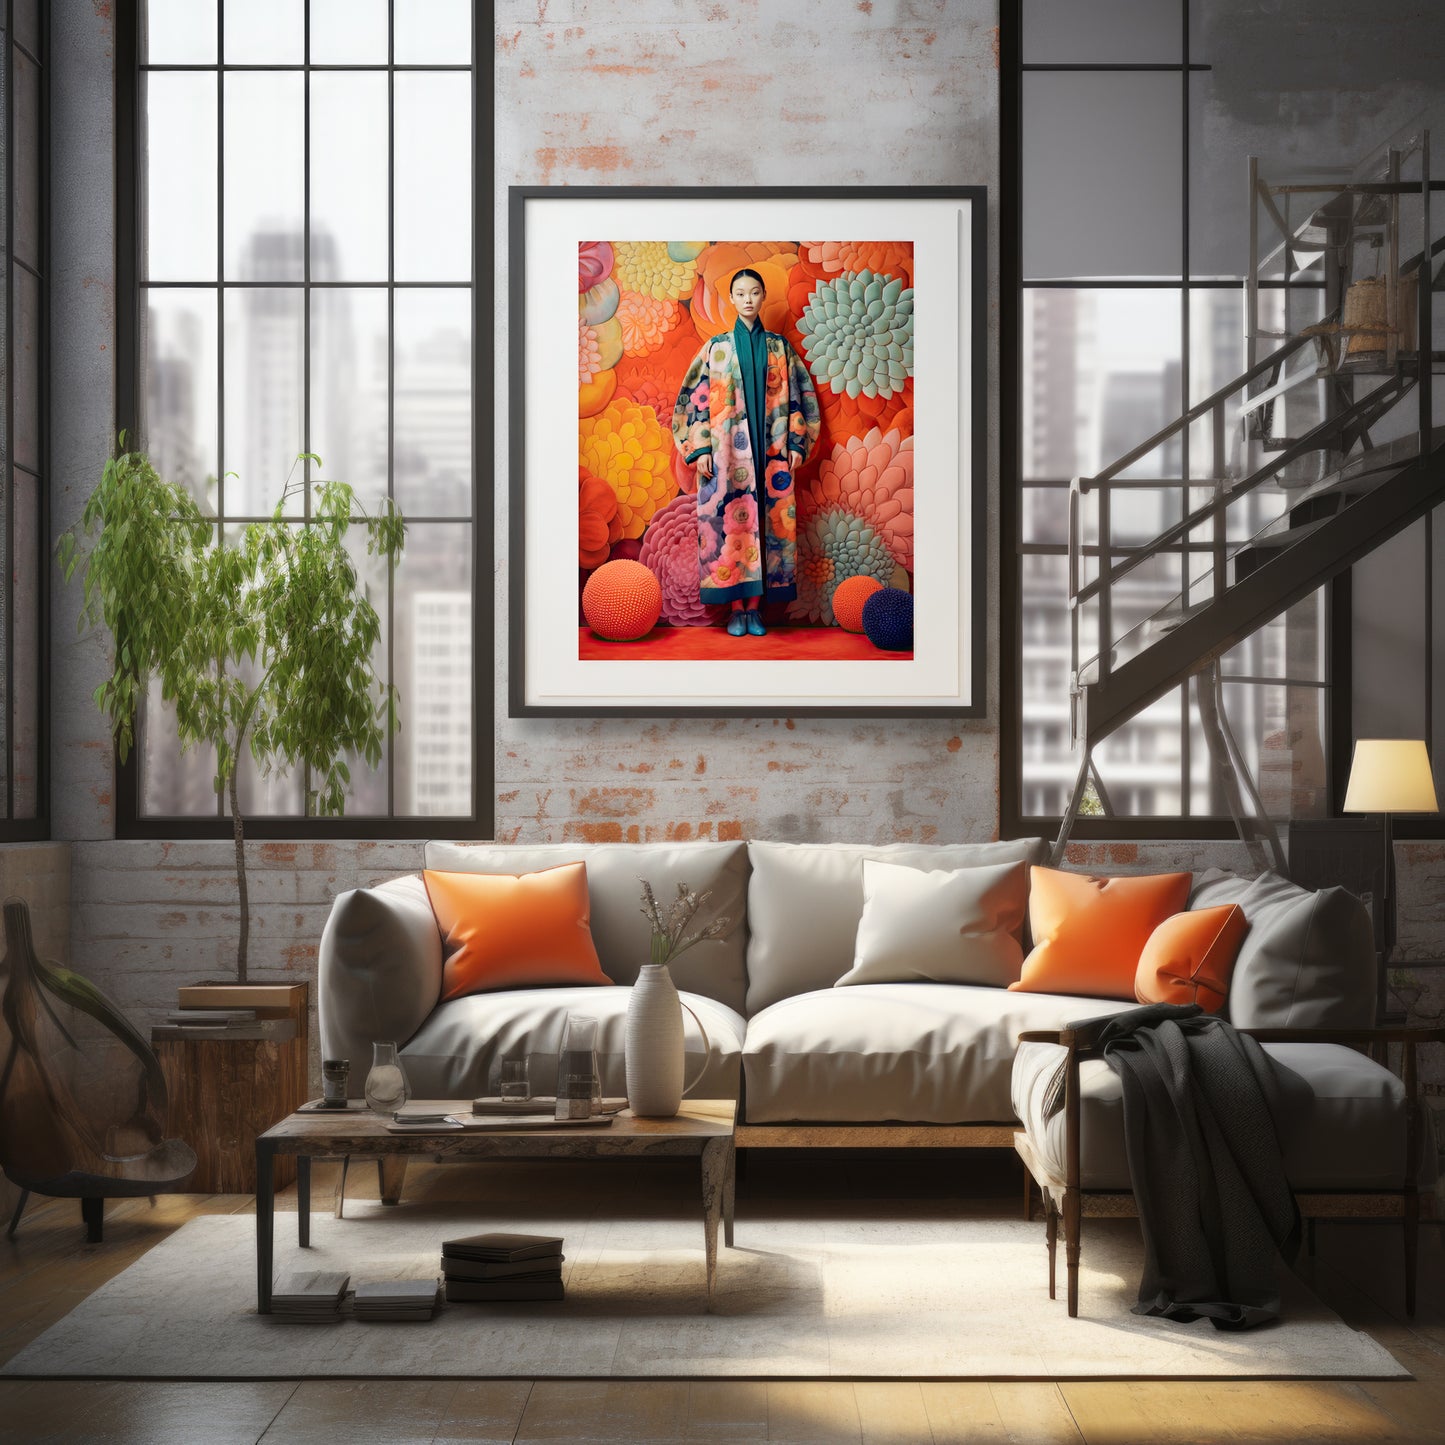 Artwork print featuring a woman in a colorful, floral-patterned coat, set against a background of large, abstract flowers in warm tones of orange, red, and yellow. This fine art print is a captivating visual fable.